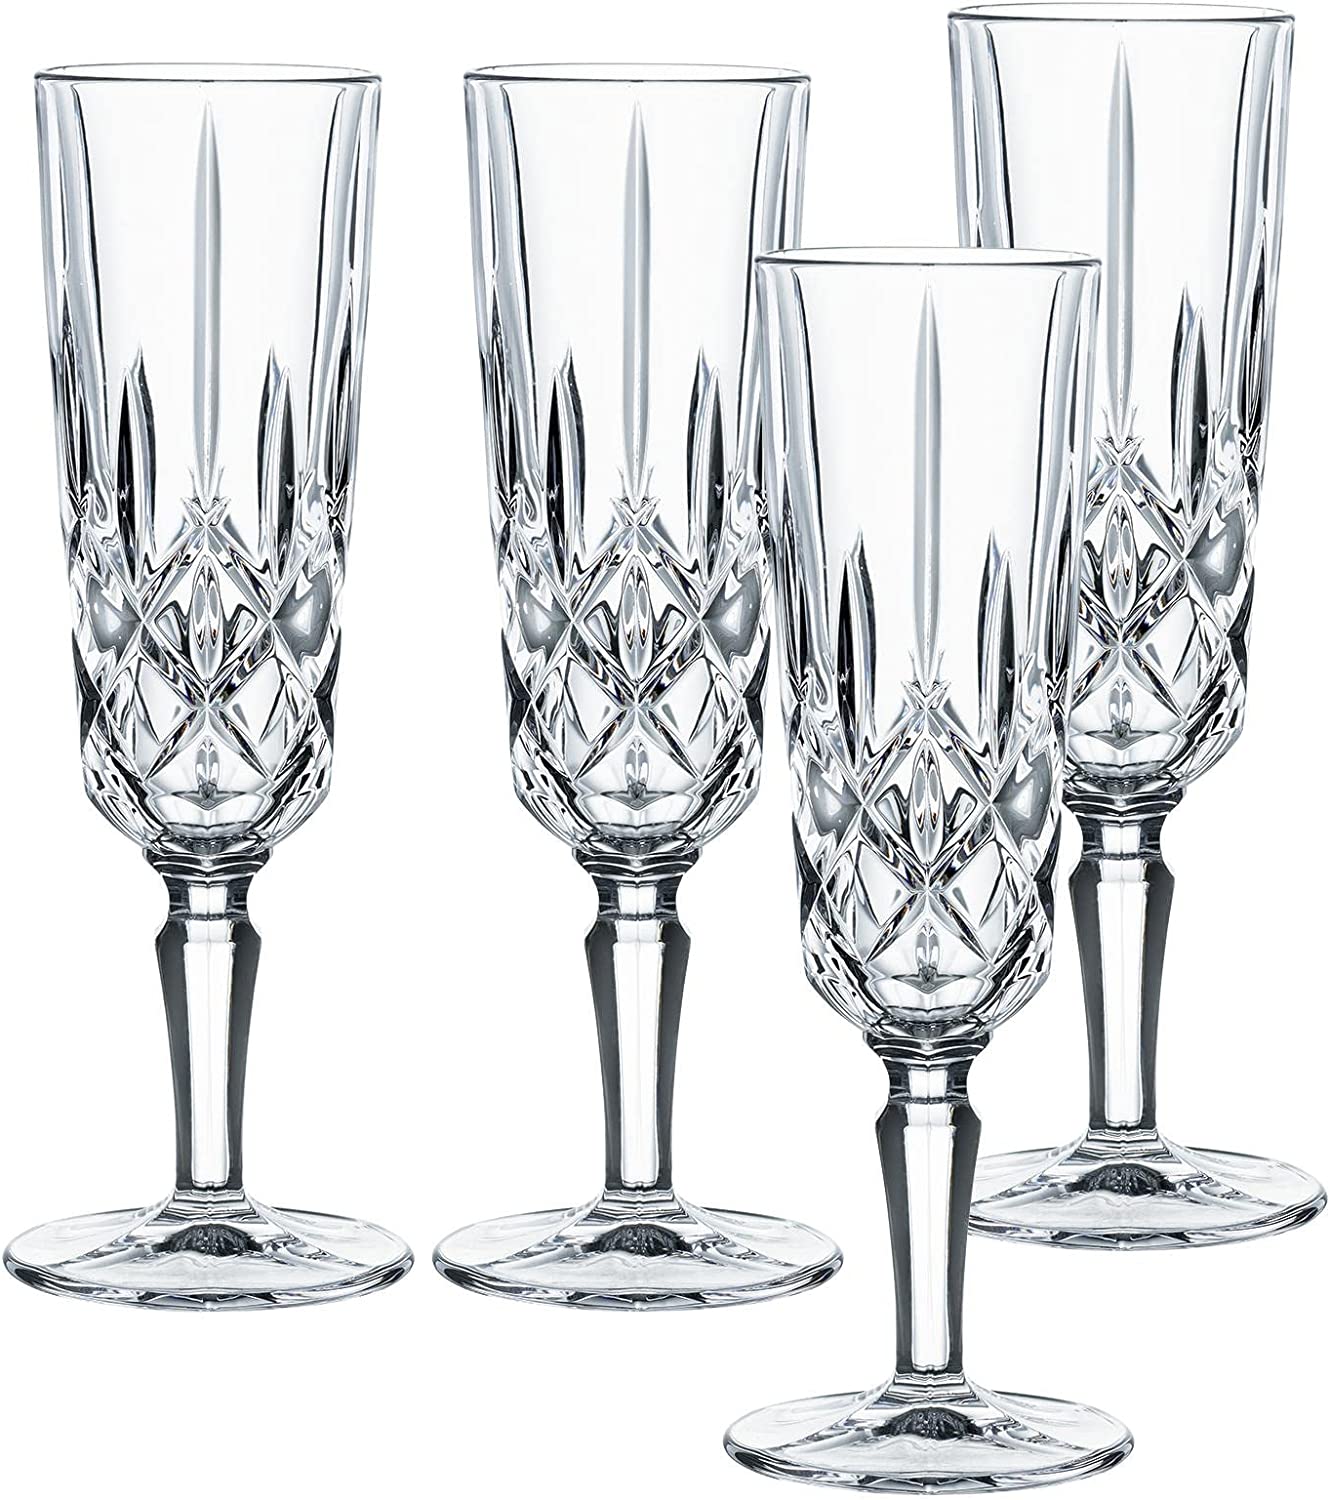 Spiegelau & Nachtmann Nachtmann Noblesse Champagne Glasses Set of 4 Made of Glass, Capacity Approx. ml